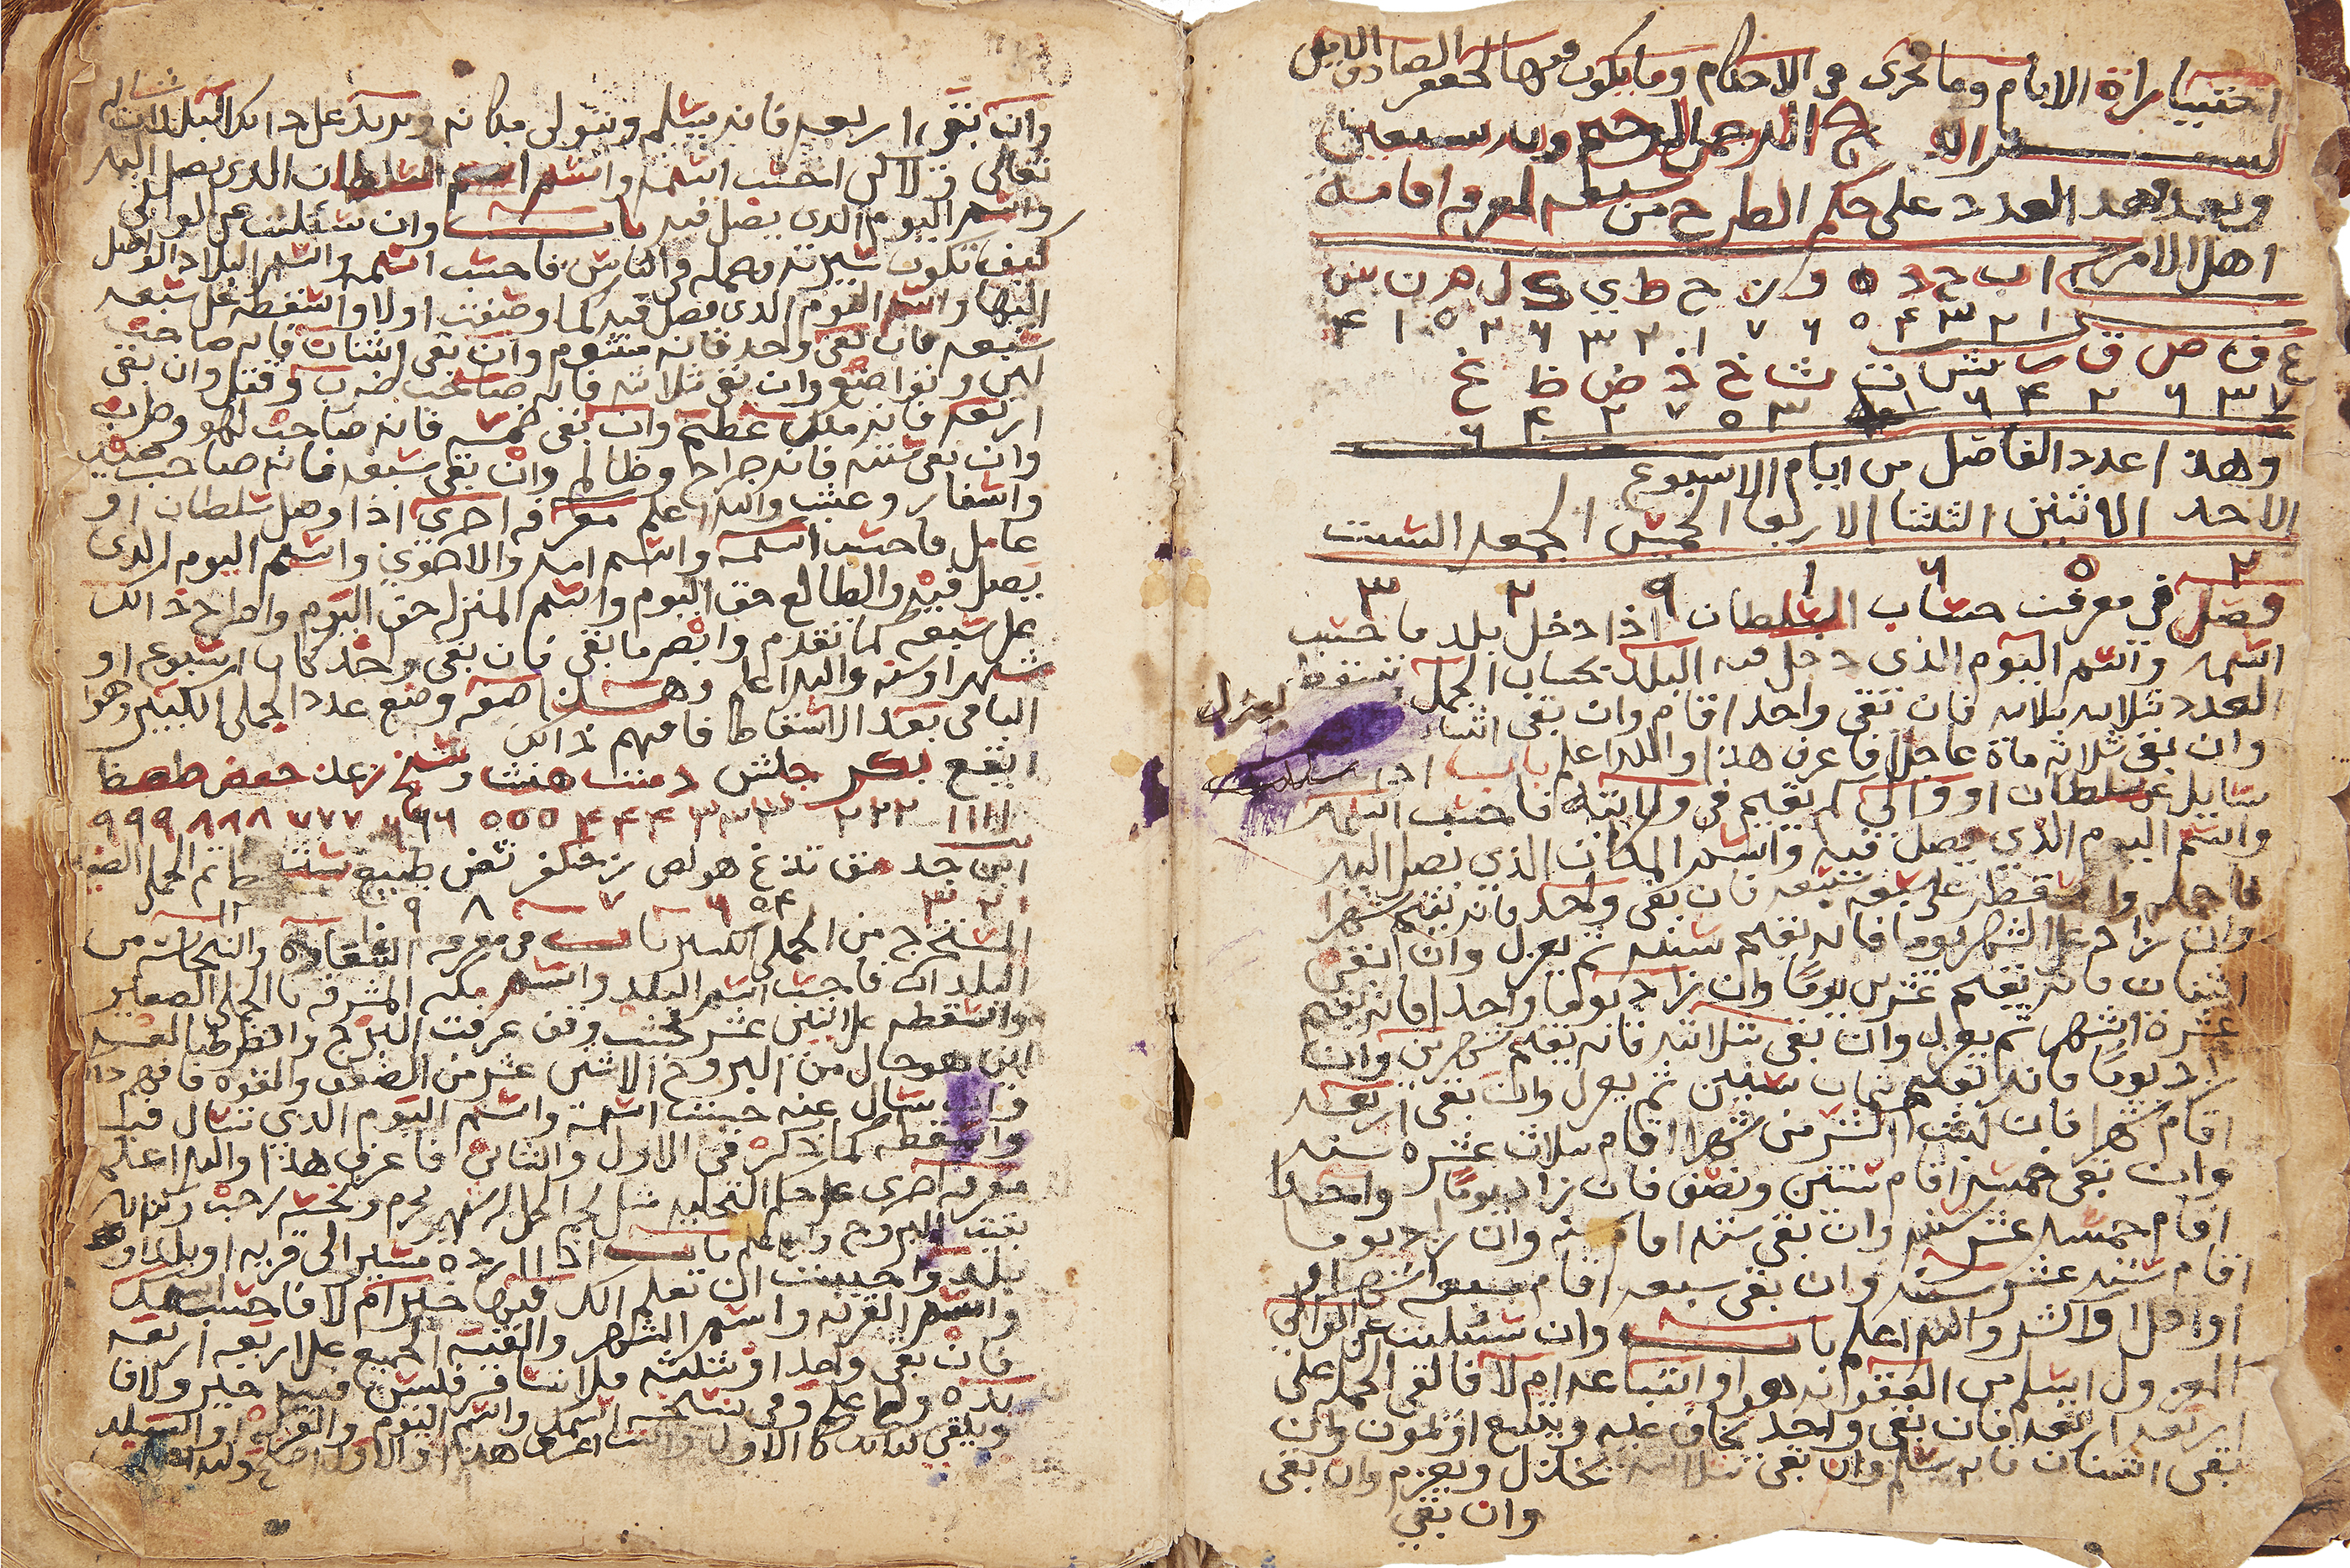 A Group of Important Works - To be sold Without Reserve Abu’l-Hasan Kushyar Ibn Labban Al-Jabali...